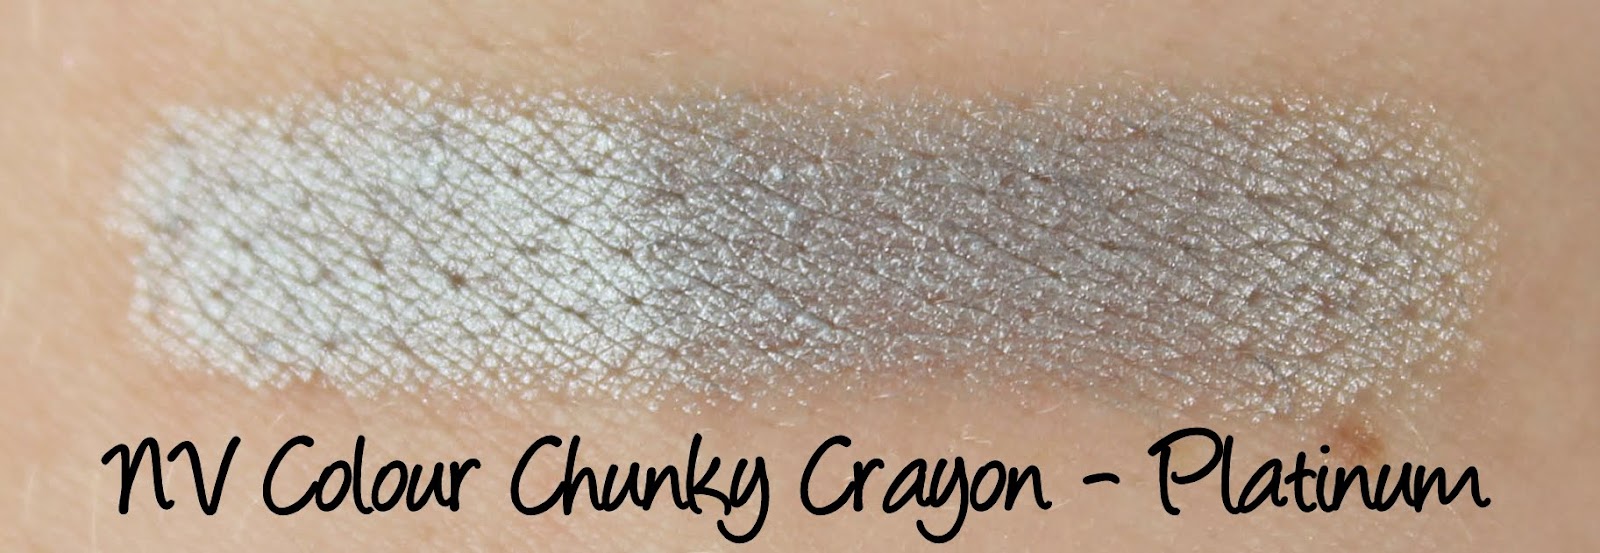 NV Colour Chunky Crayon - Platinum Swatches & Review